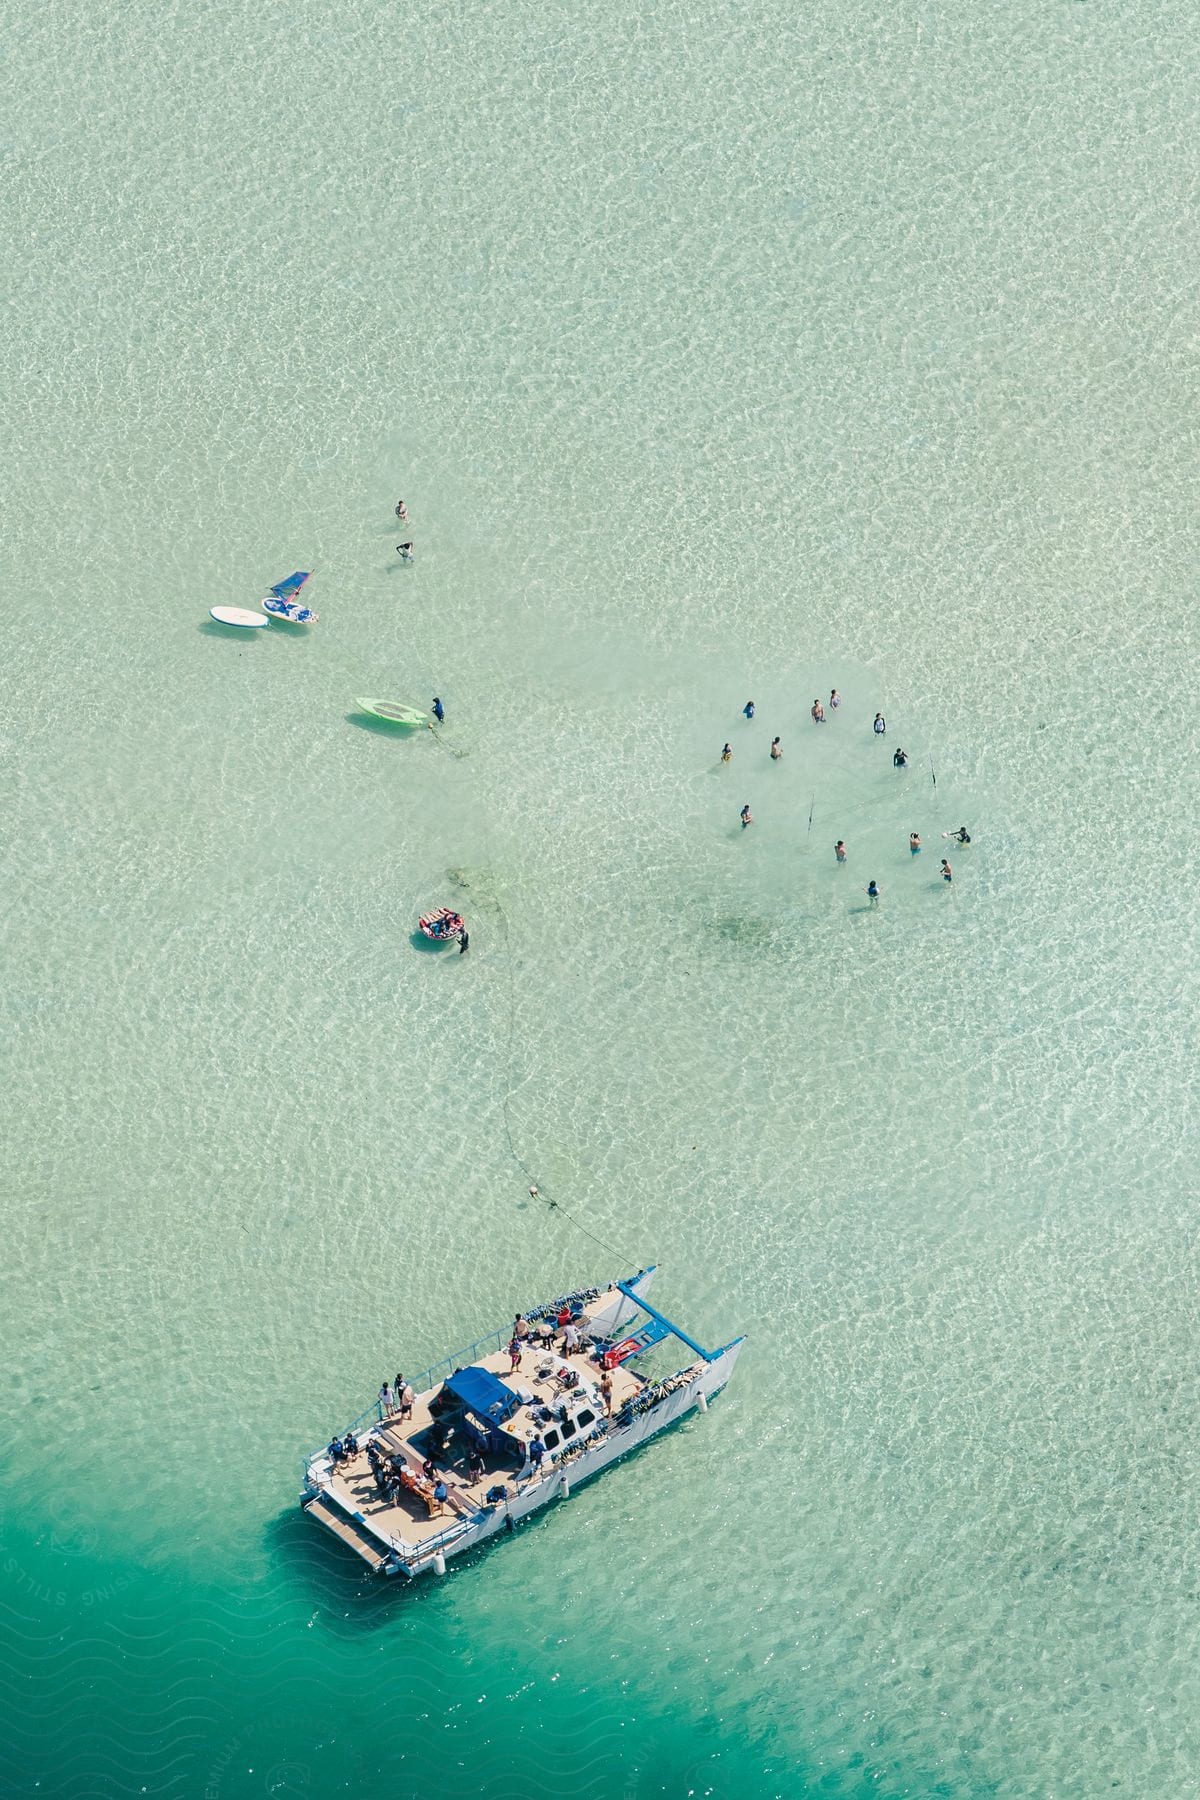 A clear sea with bathers and a boat seen from above